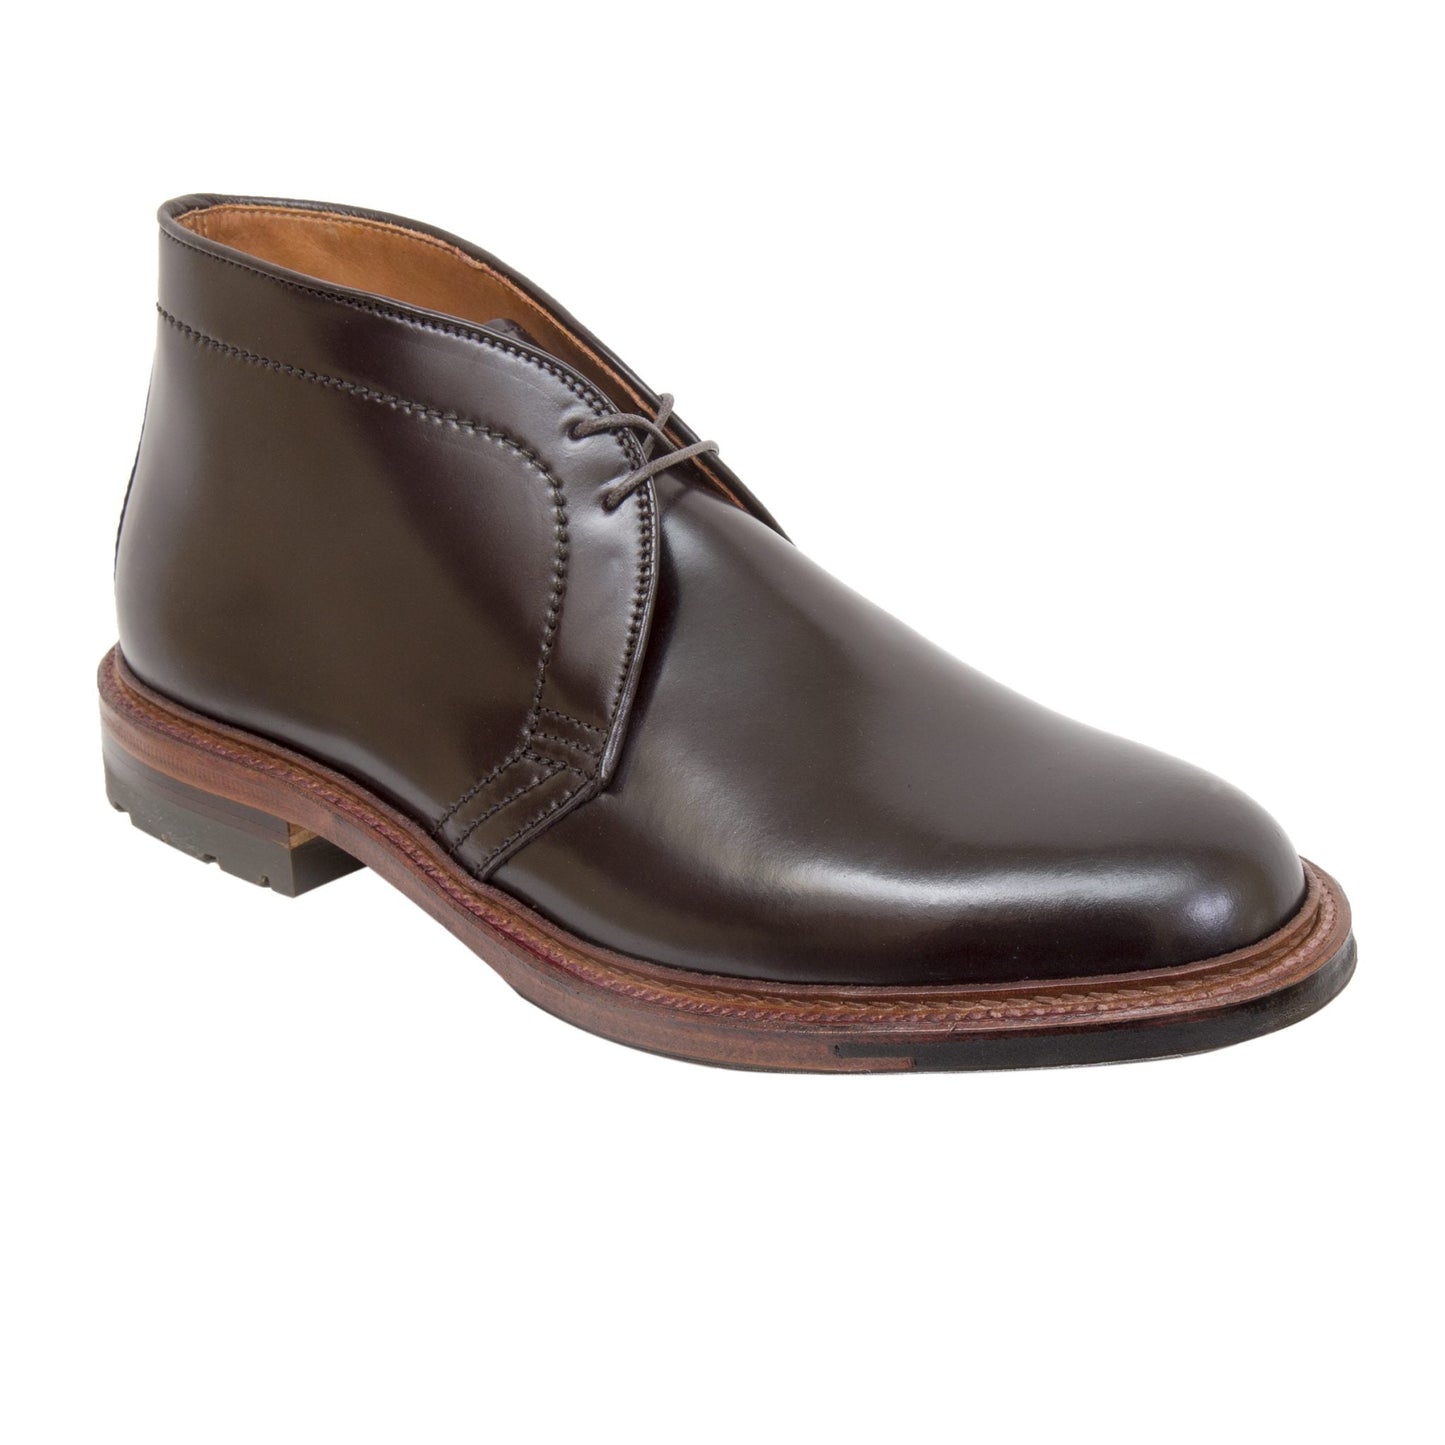 D5706C - Antique Chukka Boot in Color 8 Shell Cordovan